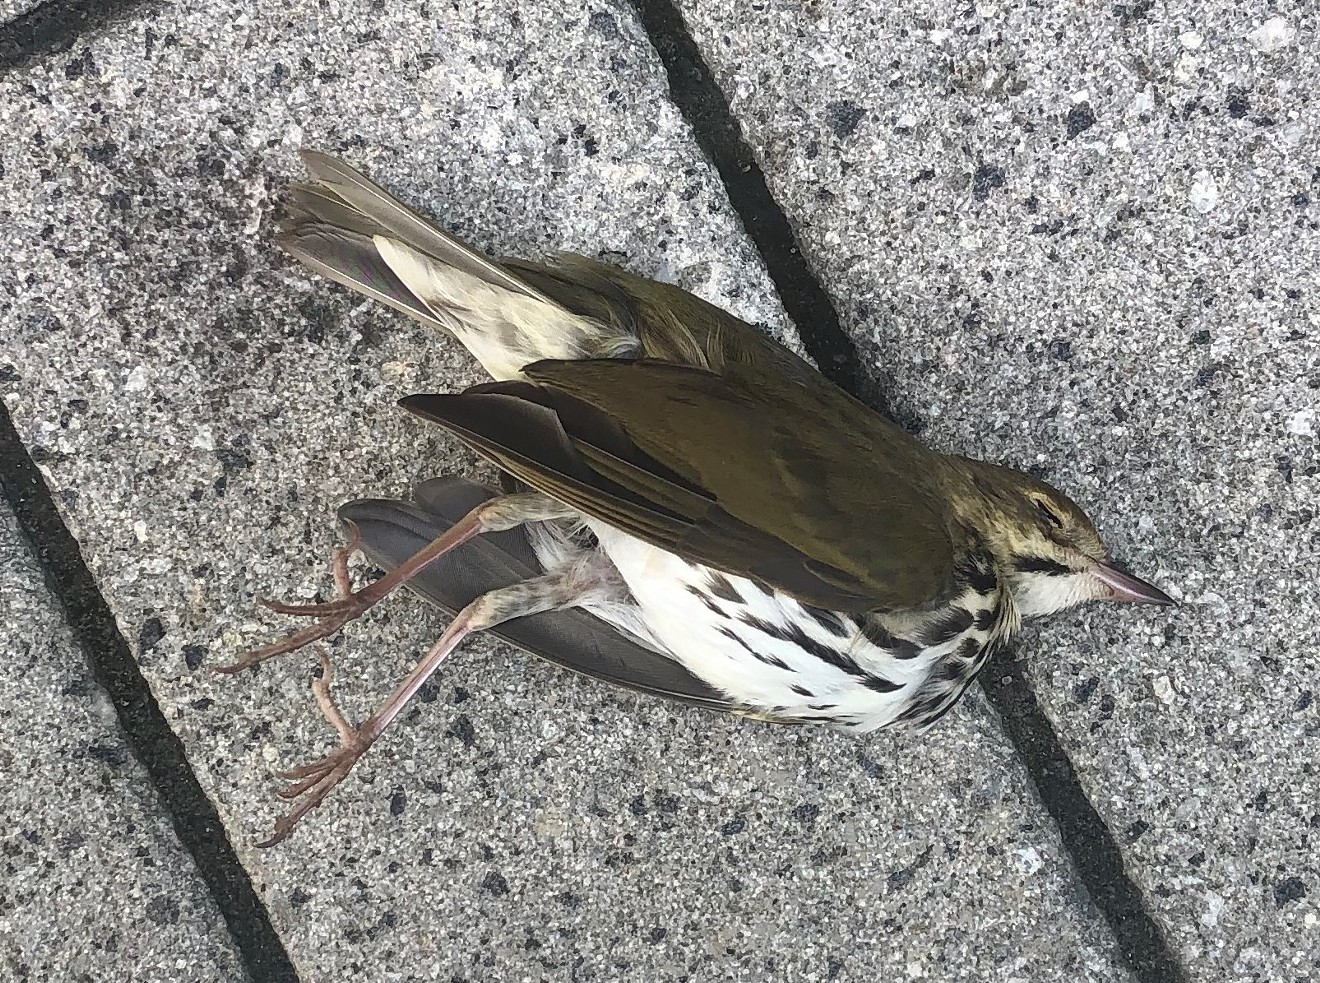 An ovenbird found on the ground in downtown Miami.